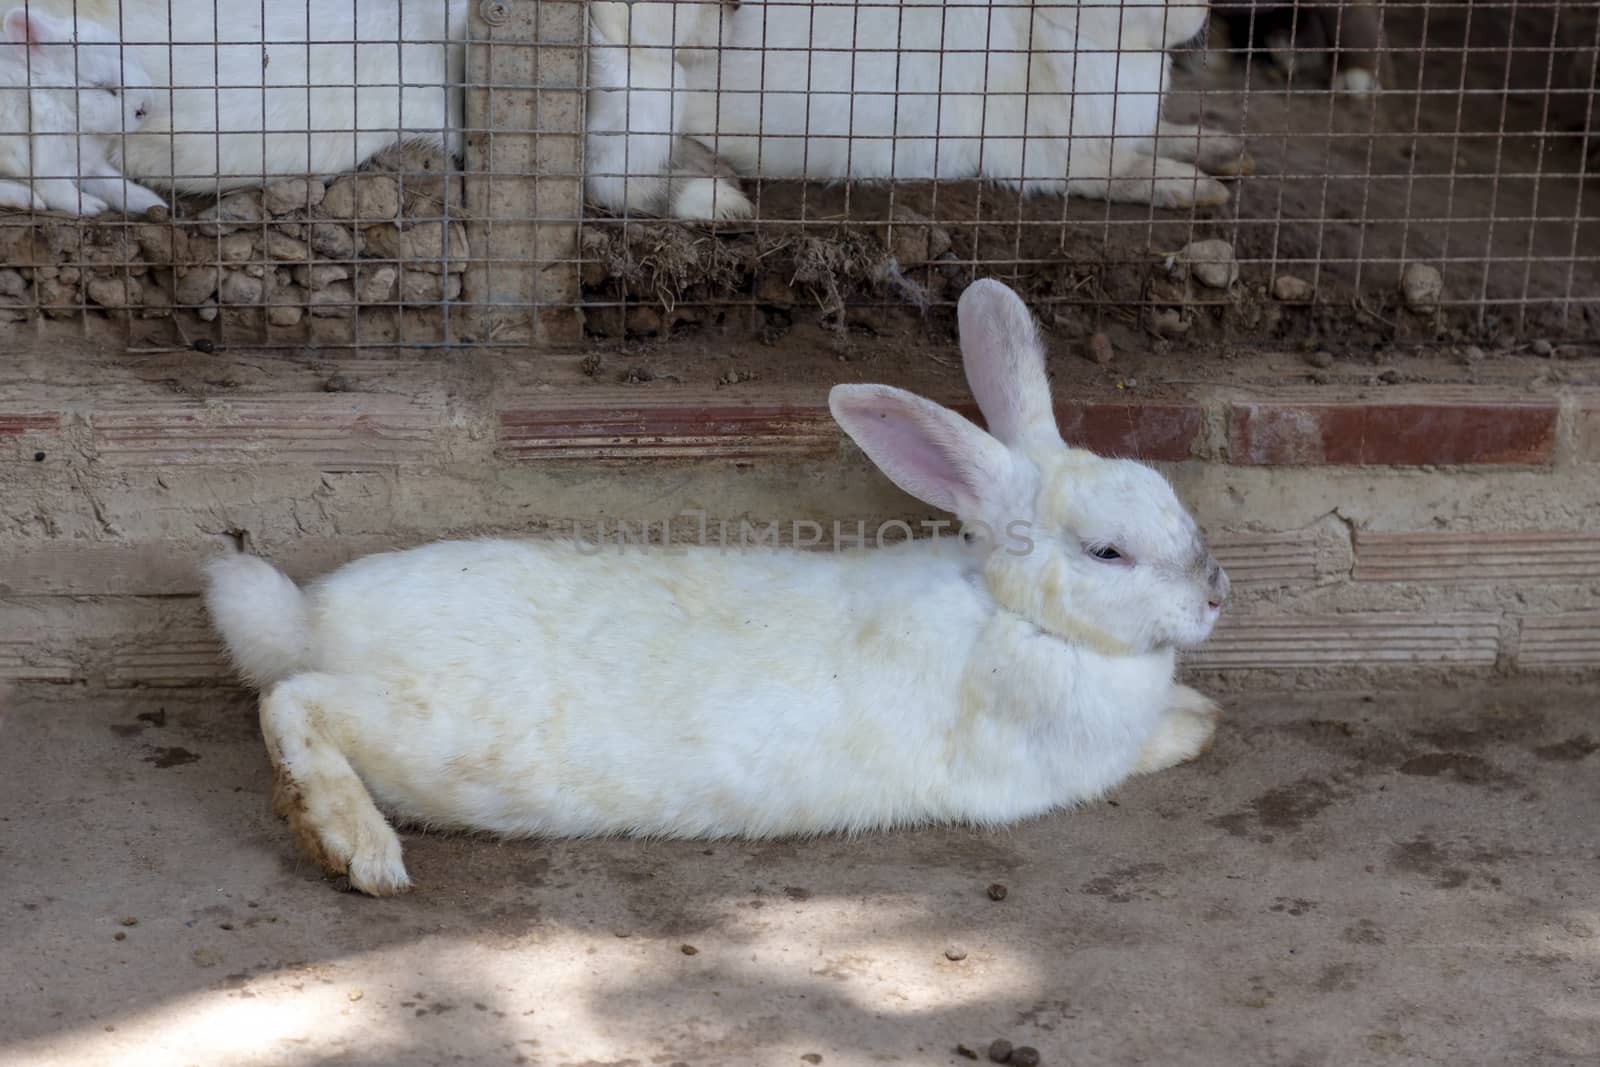 A ragged white rabbit lying on the floor next to The cage with other rabbits inside